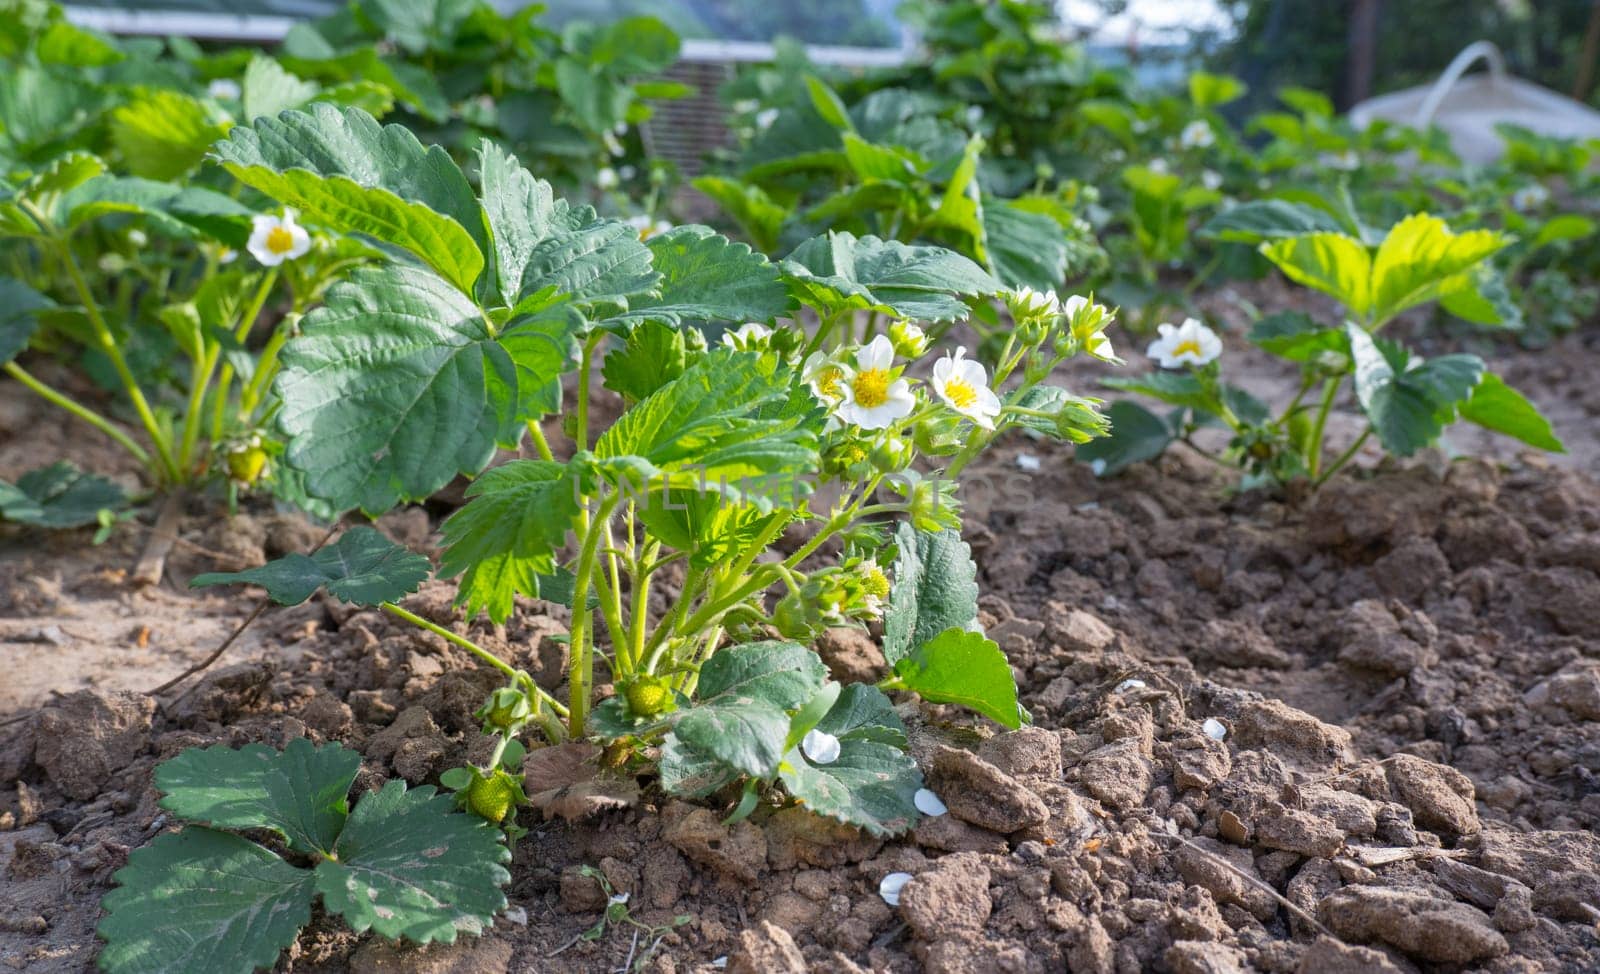 Blooming strawberry bushes. Strawberry plants with flowers and berries